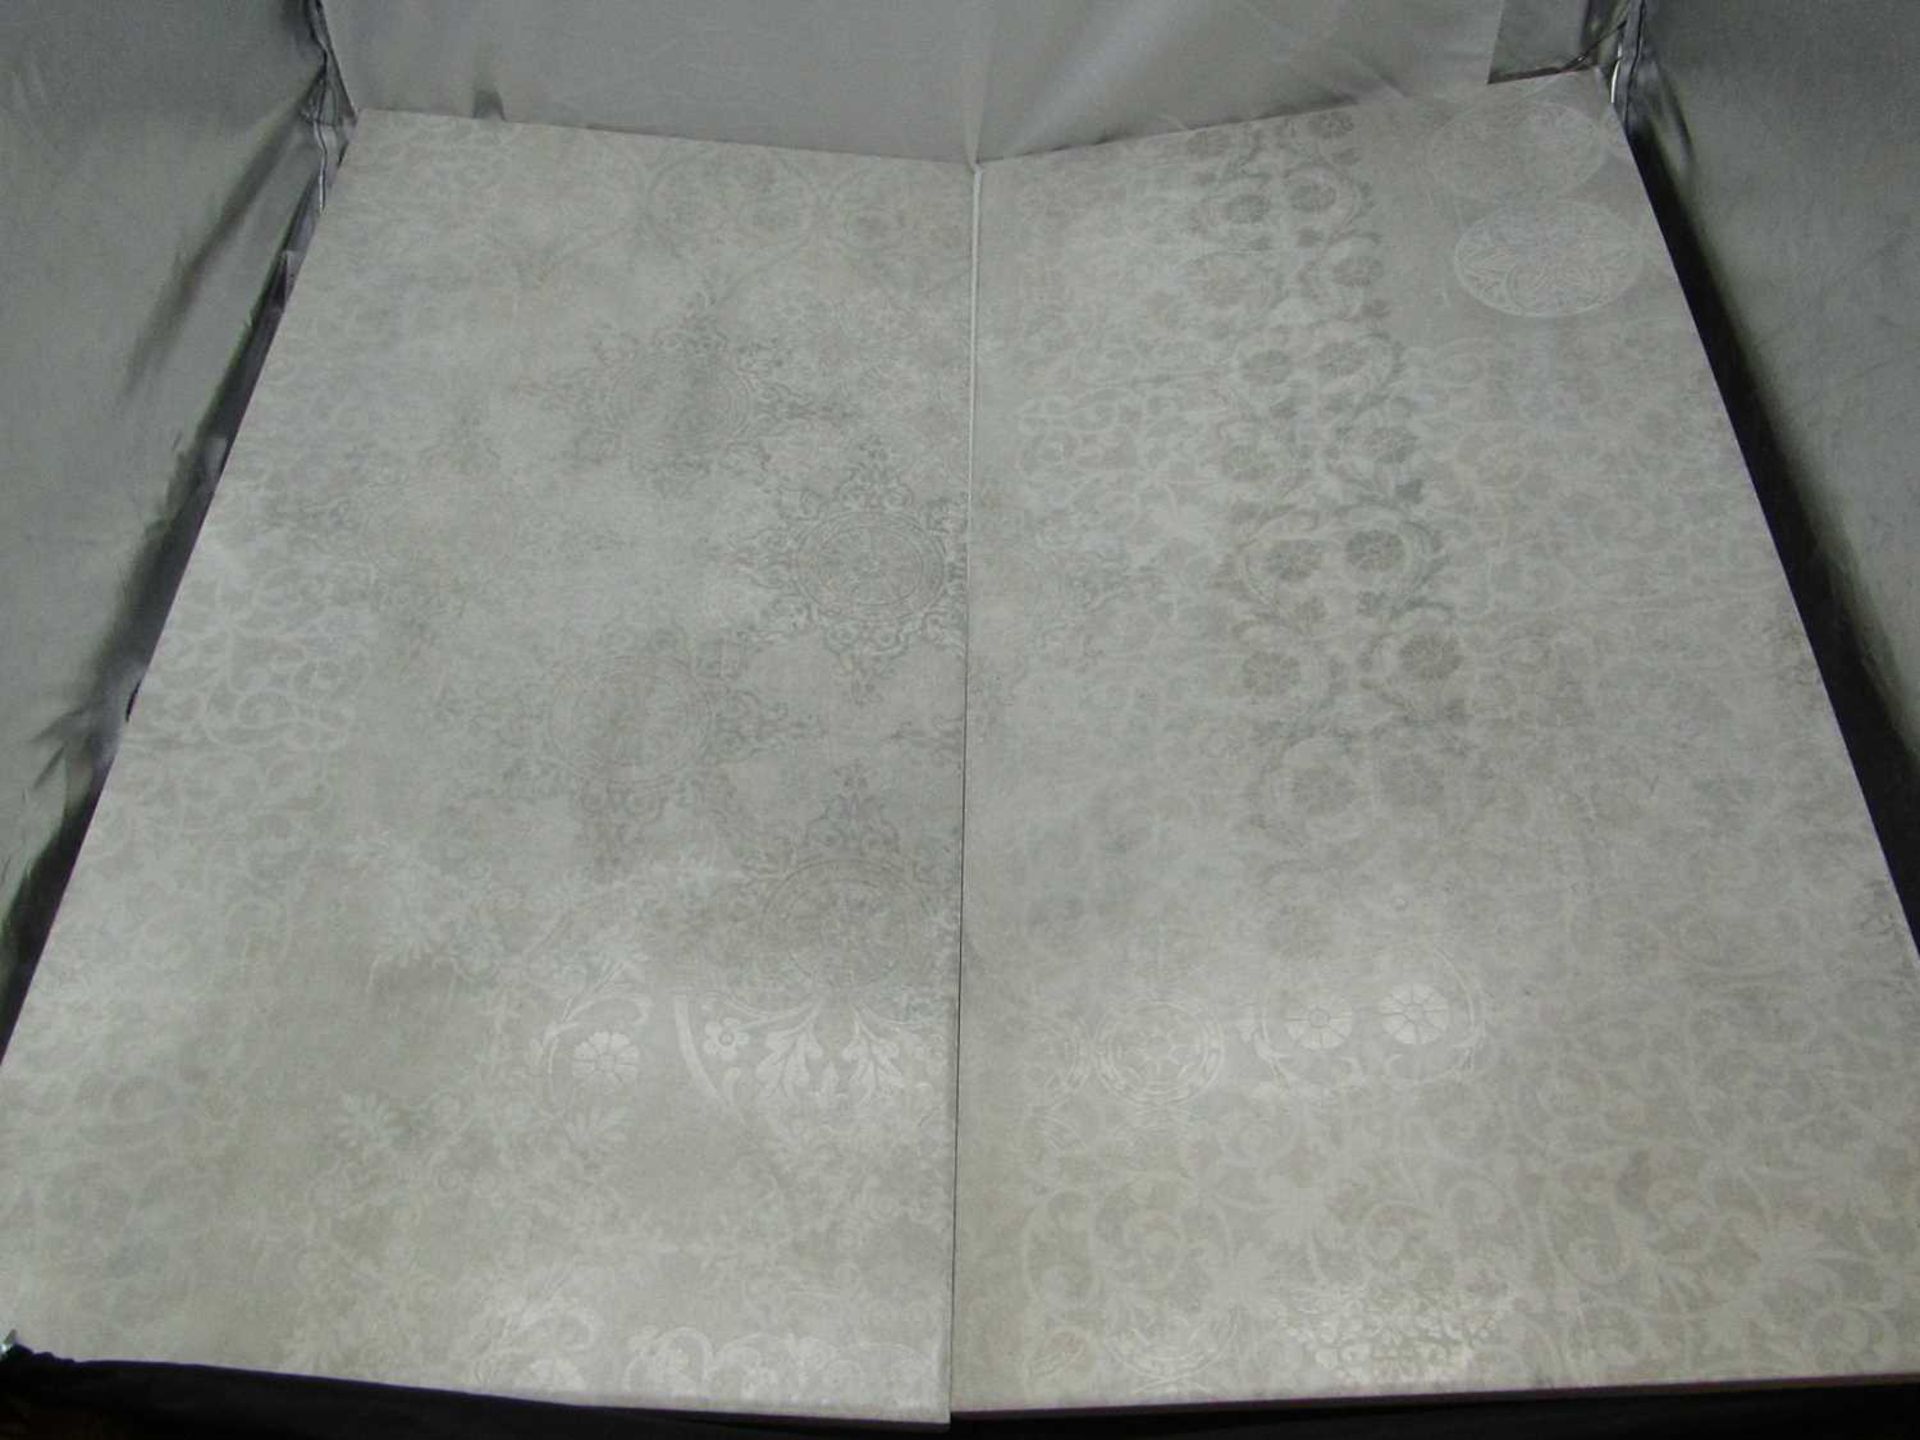 5x Packs of 5 Homebase 600x300mm Distressed Damask Grey wall tiles, new, ref code AA064YURBA1A005,